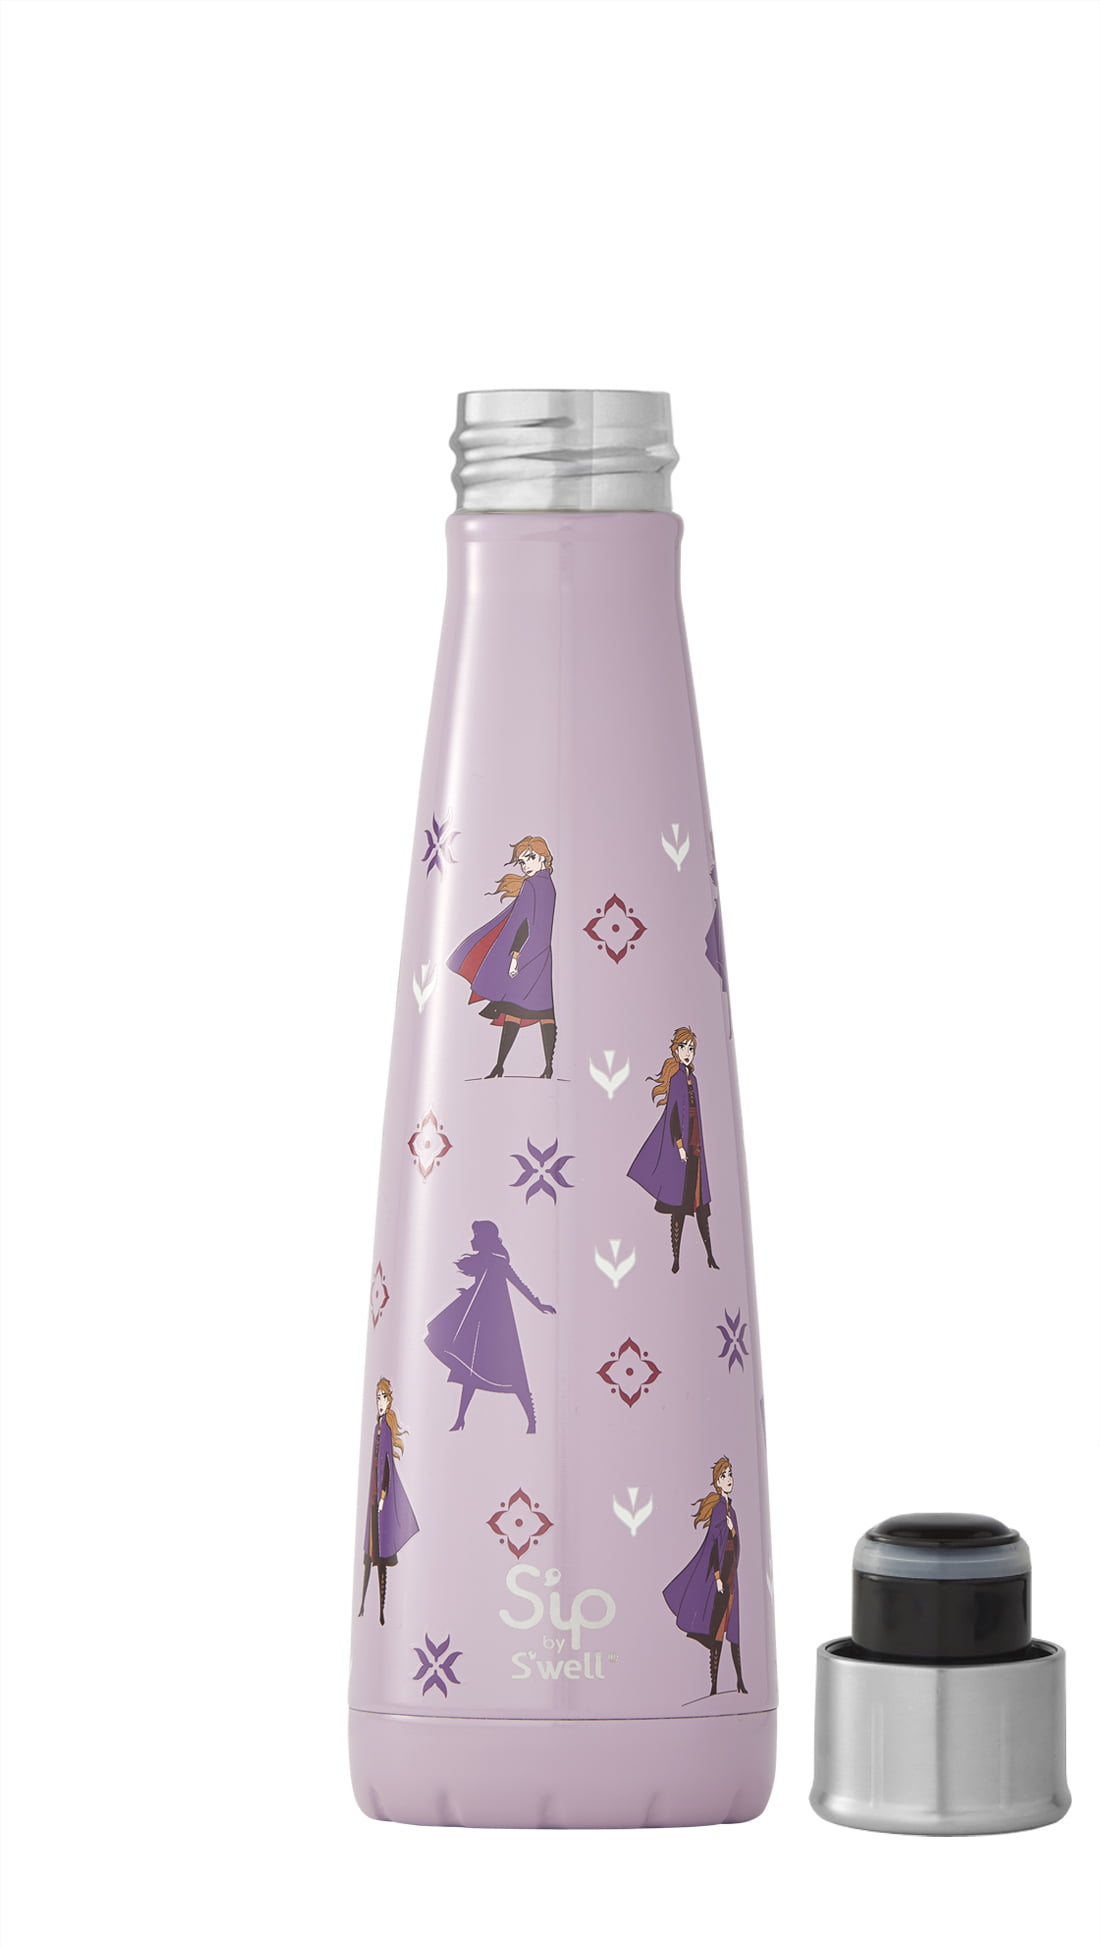 S'ip by S'well Stainless Steel Water Bottle - 15 fl oz - Disney Minnie Mouse Bow